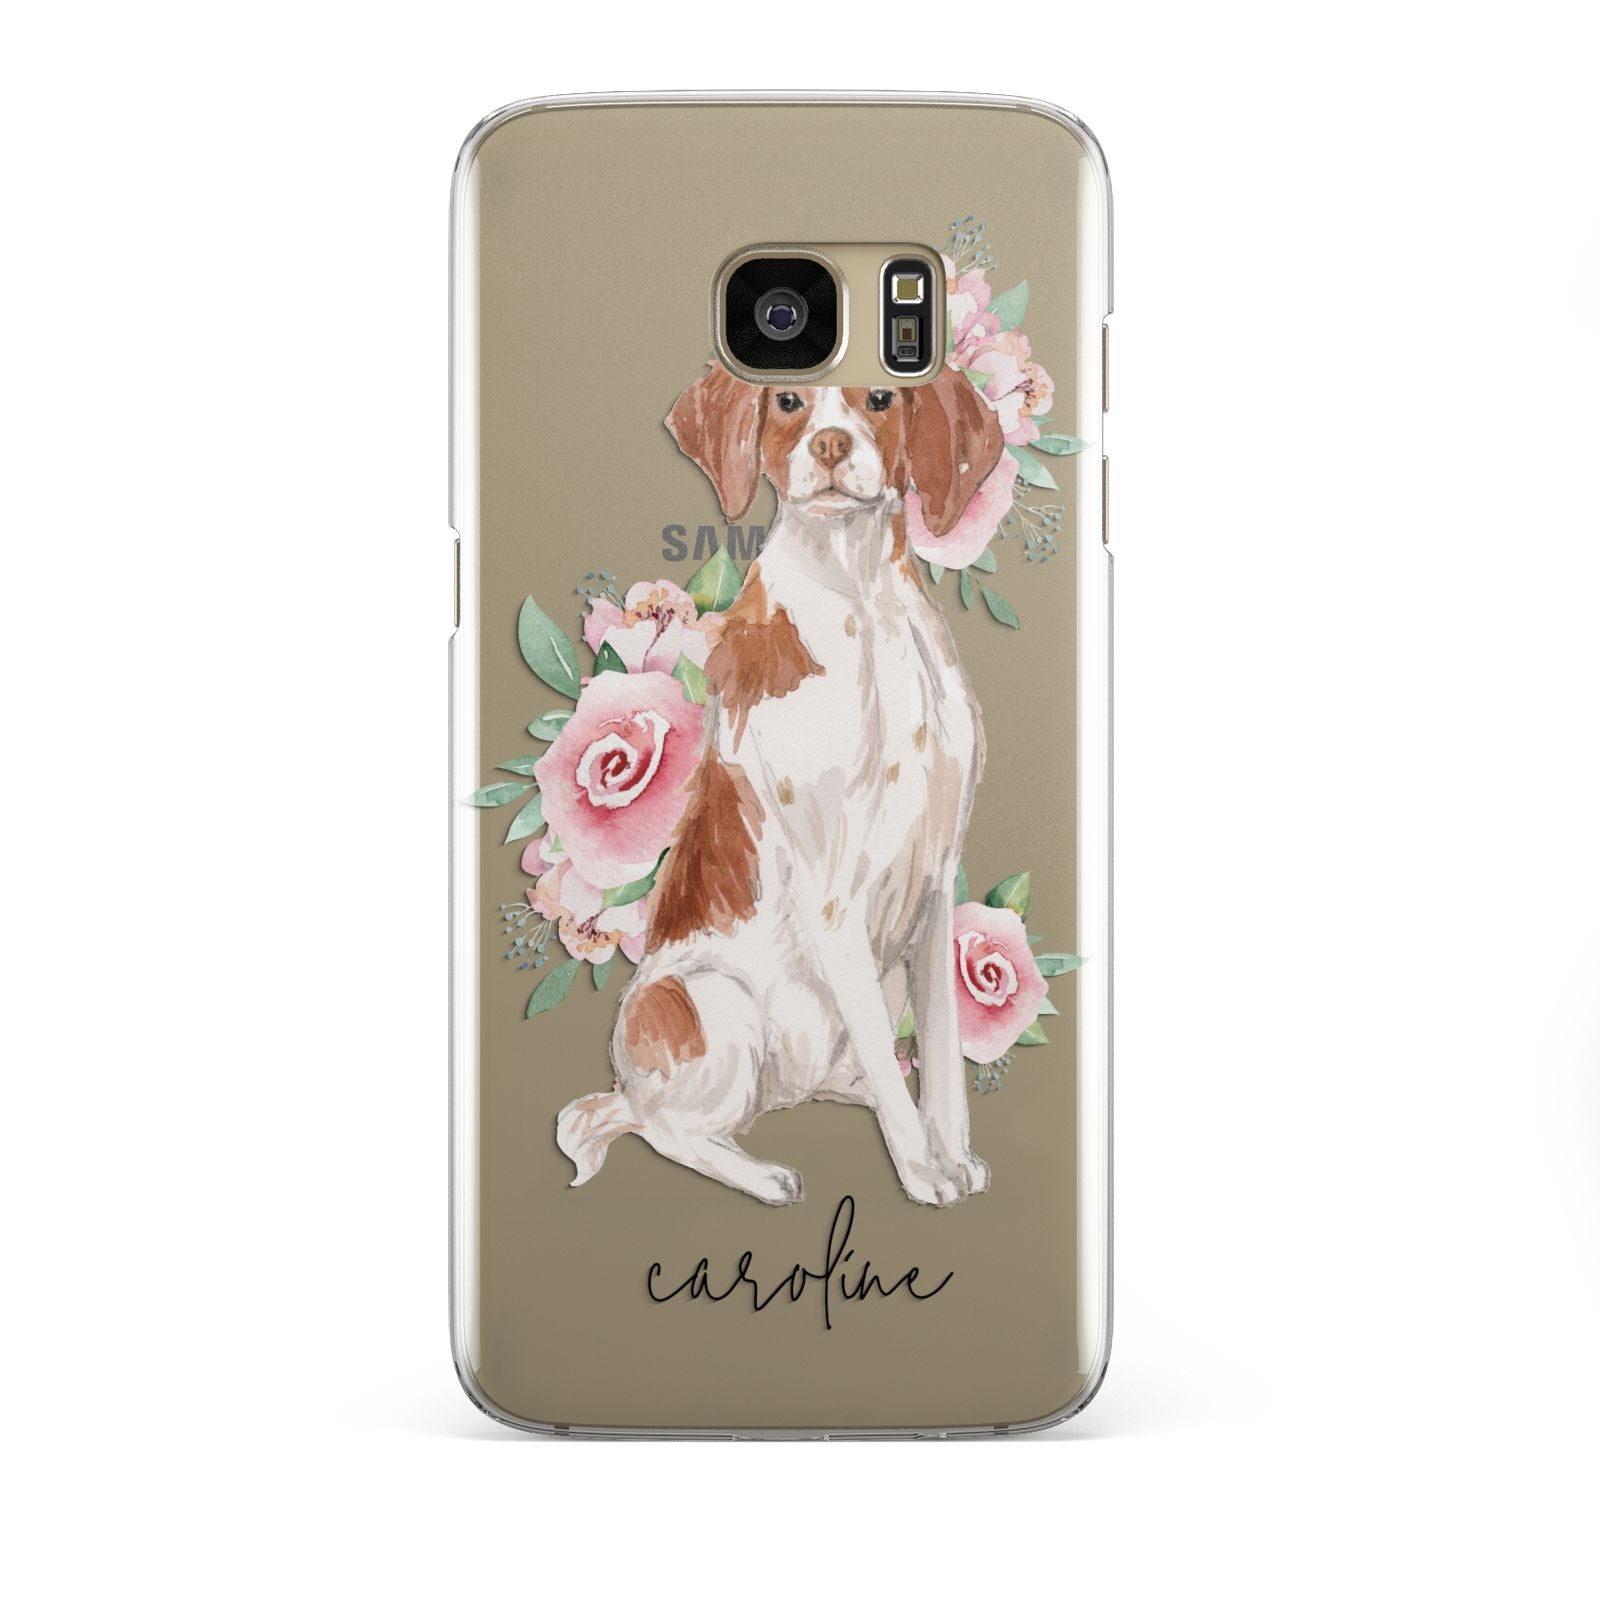 Personalised Brittany Dog Samsung Galaxy S7 Edge Case